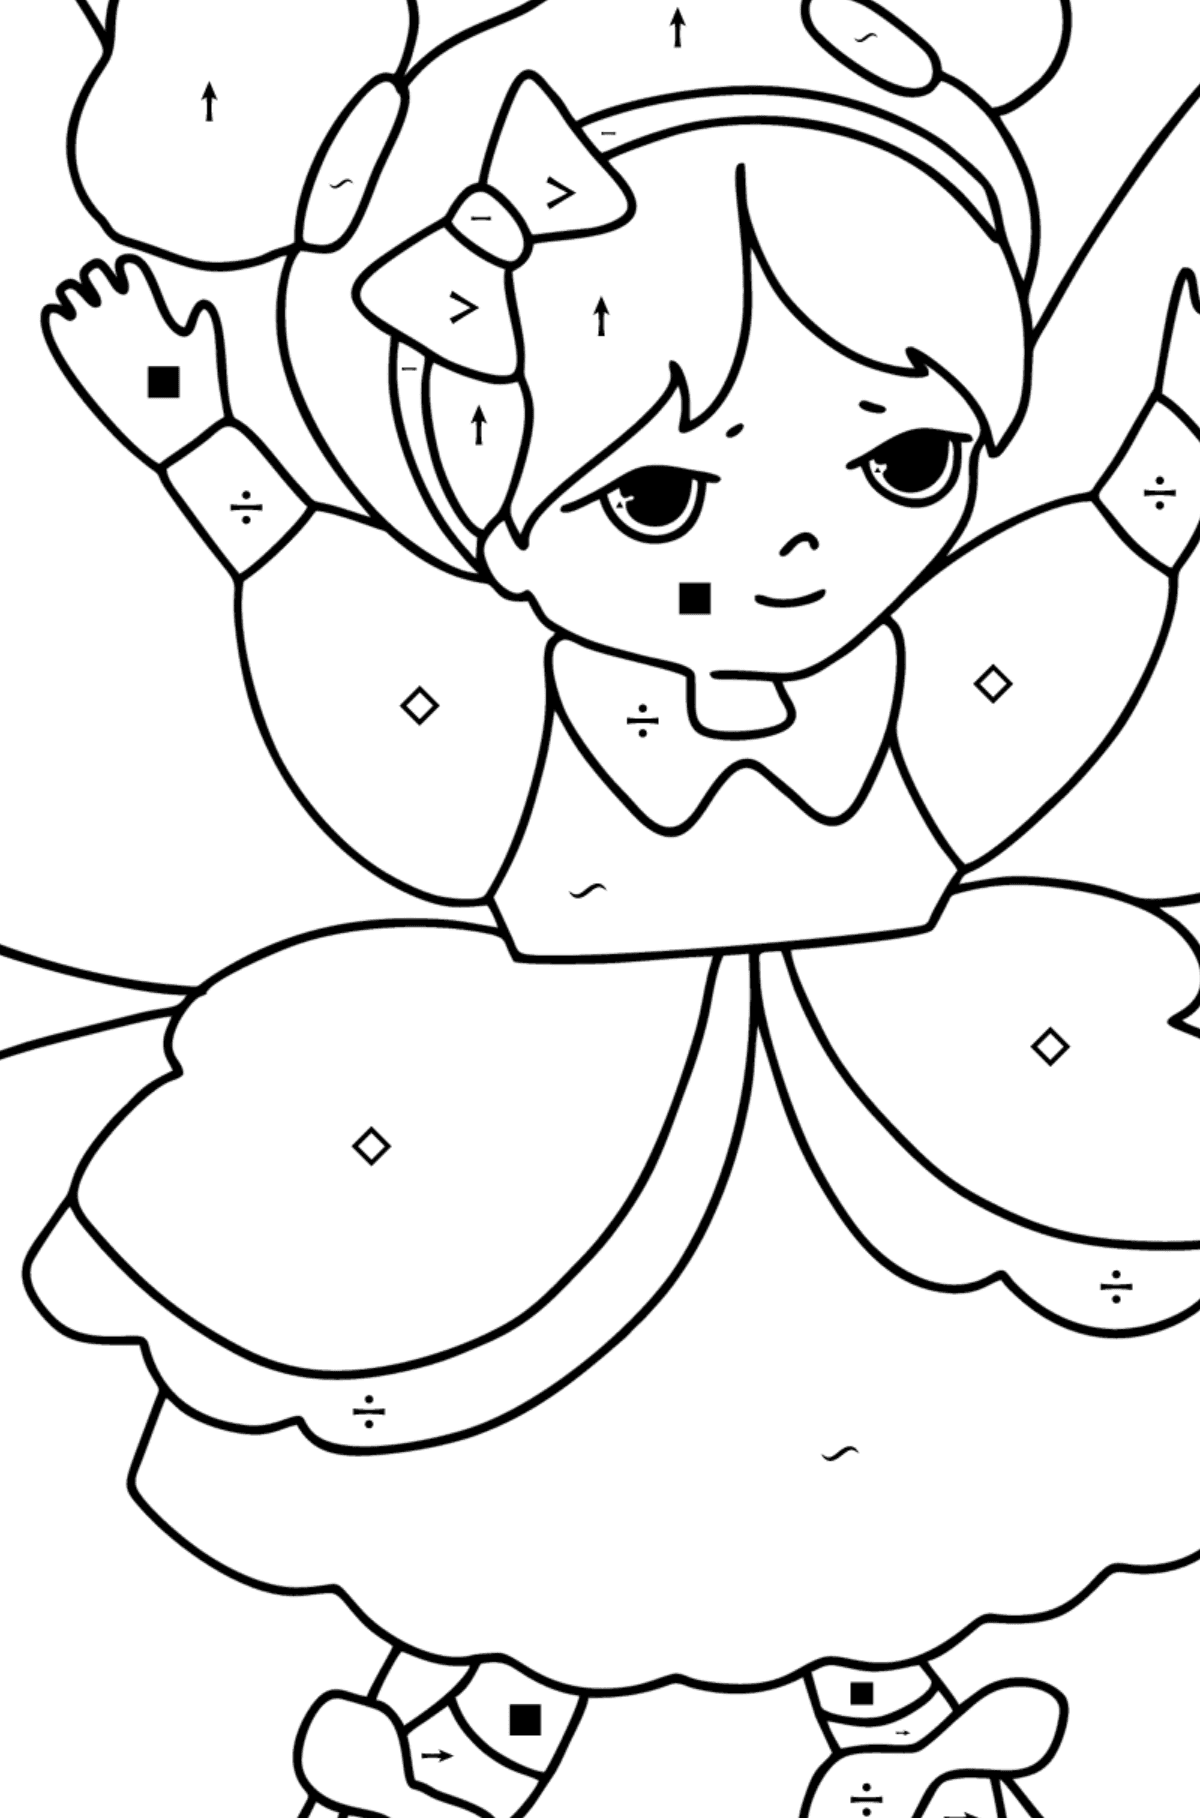 Flying Fairy coloring page - Coloring by Symbols for Kids